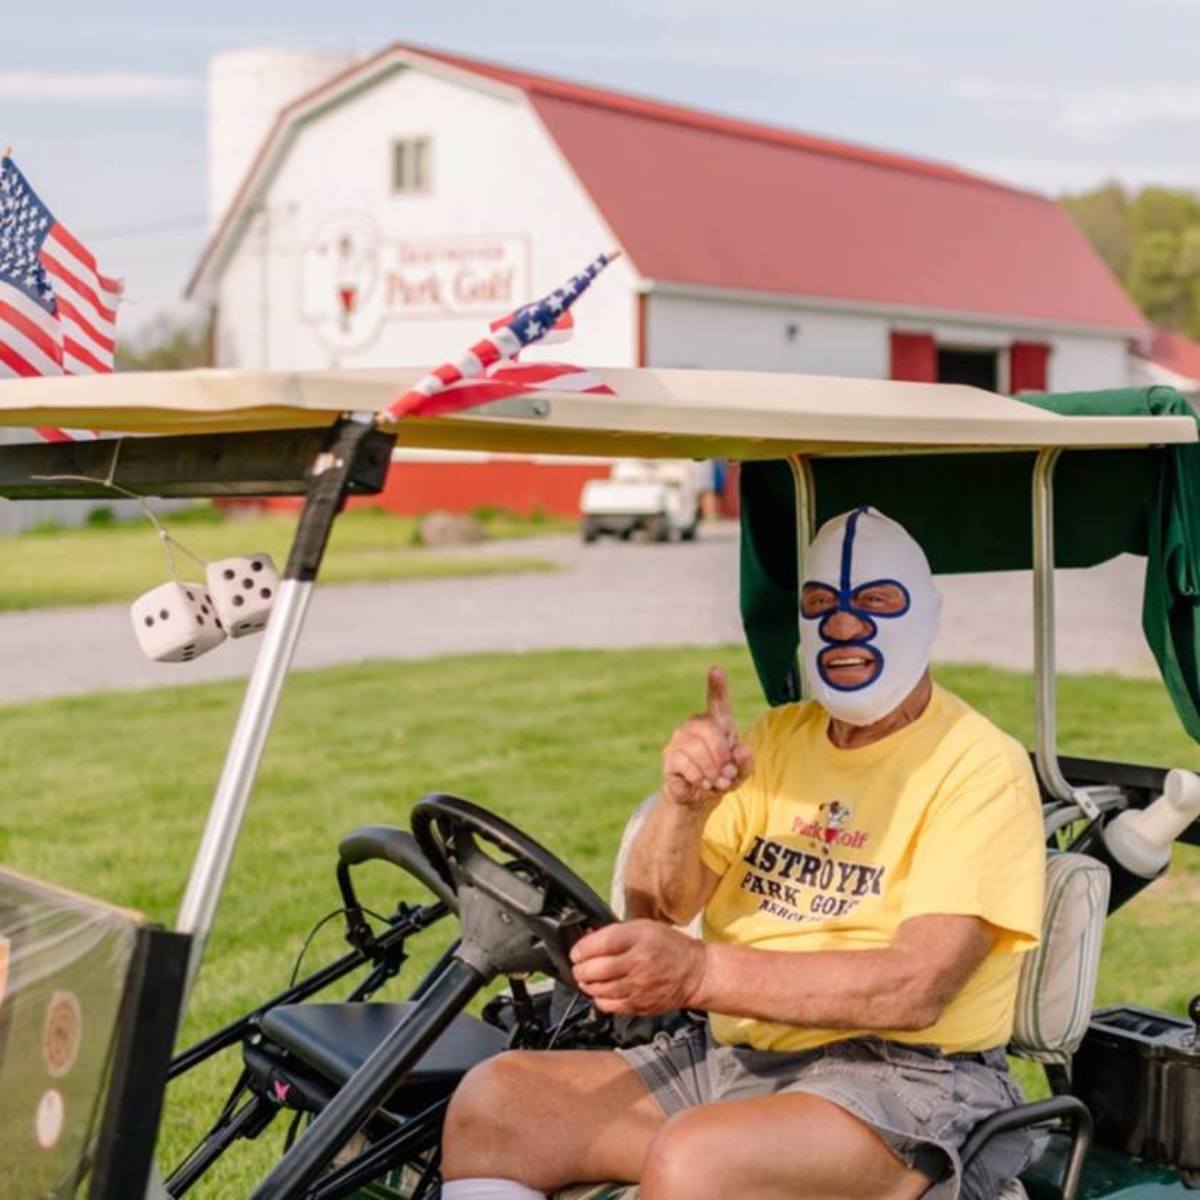 Dick "The Destoyer" Beyer, a hall of fame professional wrestler, became so smitten with Park Golf in Japan that he brought the concept back to the United States. In retirement, Beyer could be found riding around the Destroyer Park Golf course, located in Akron, N.Y., in his trademark wrestling mask. 